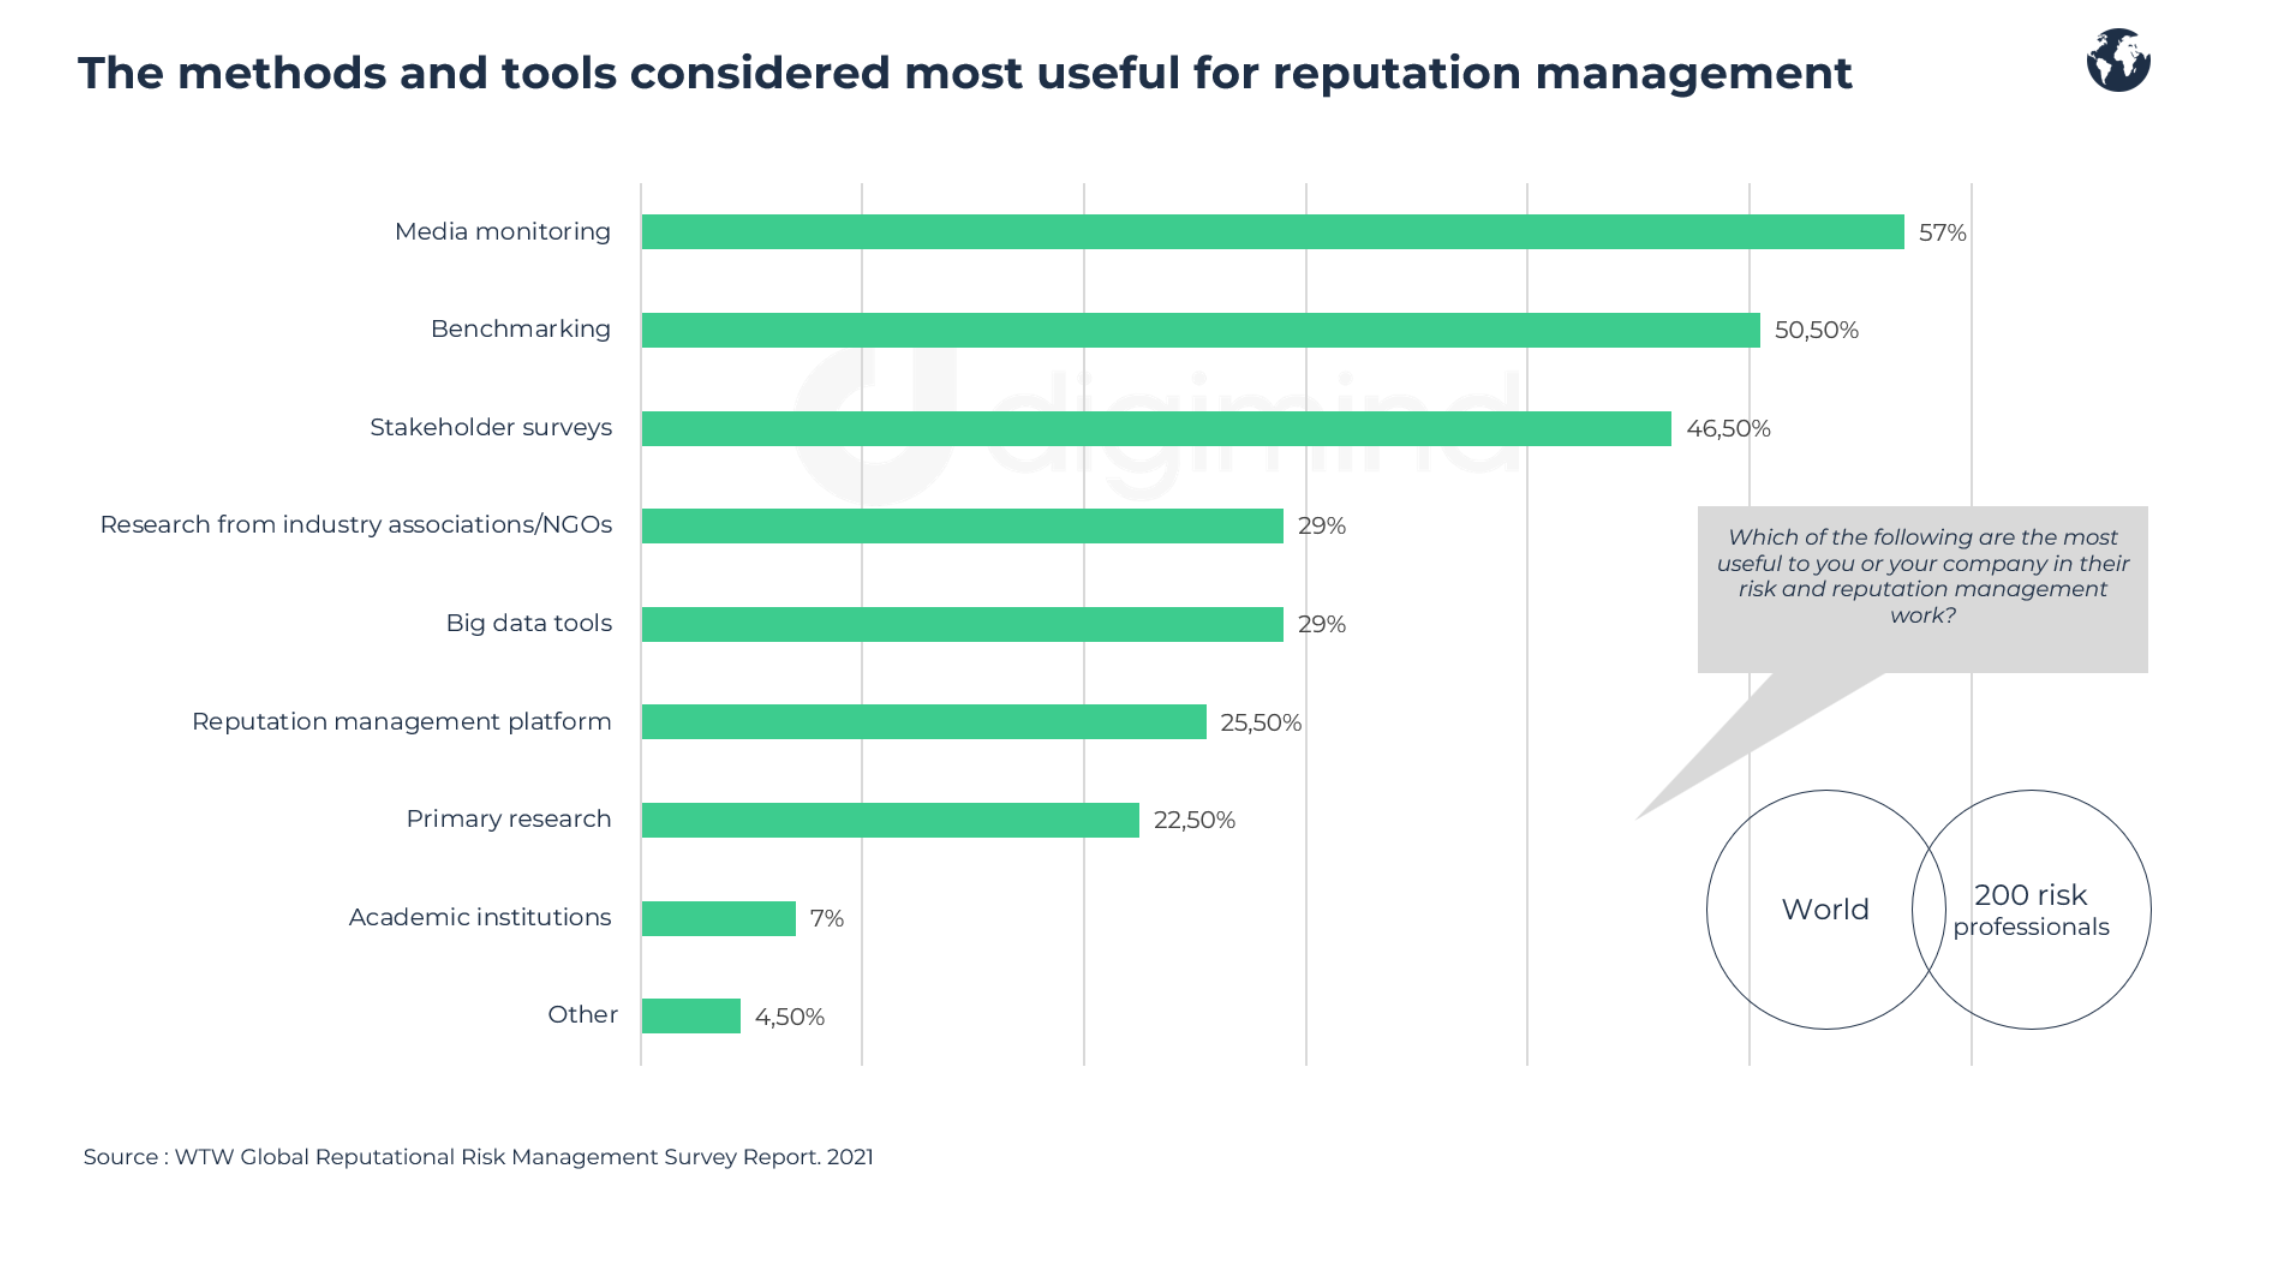 The methods and tools considered most useful for reputation management